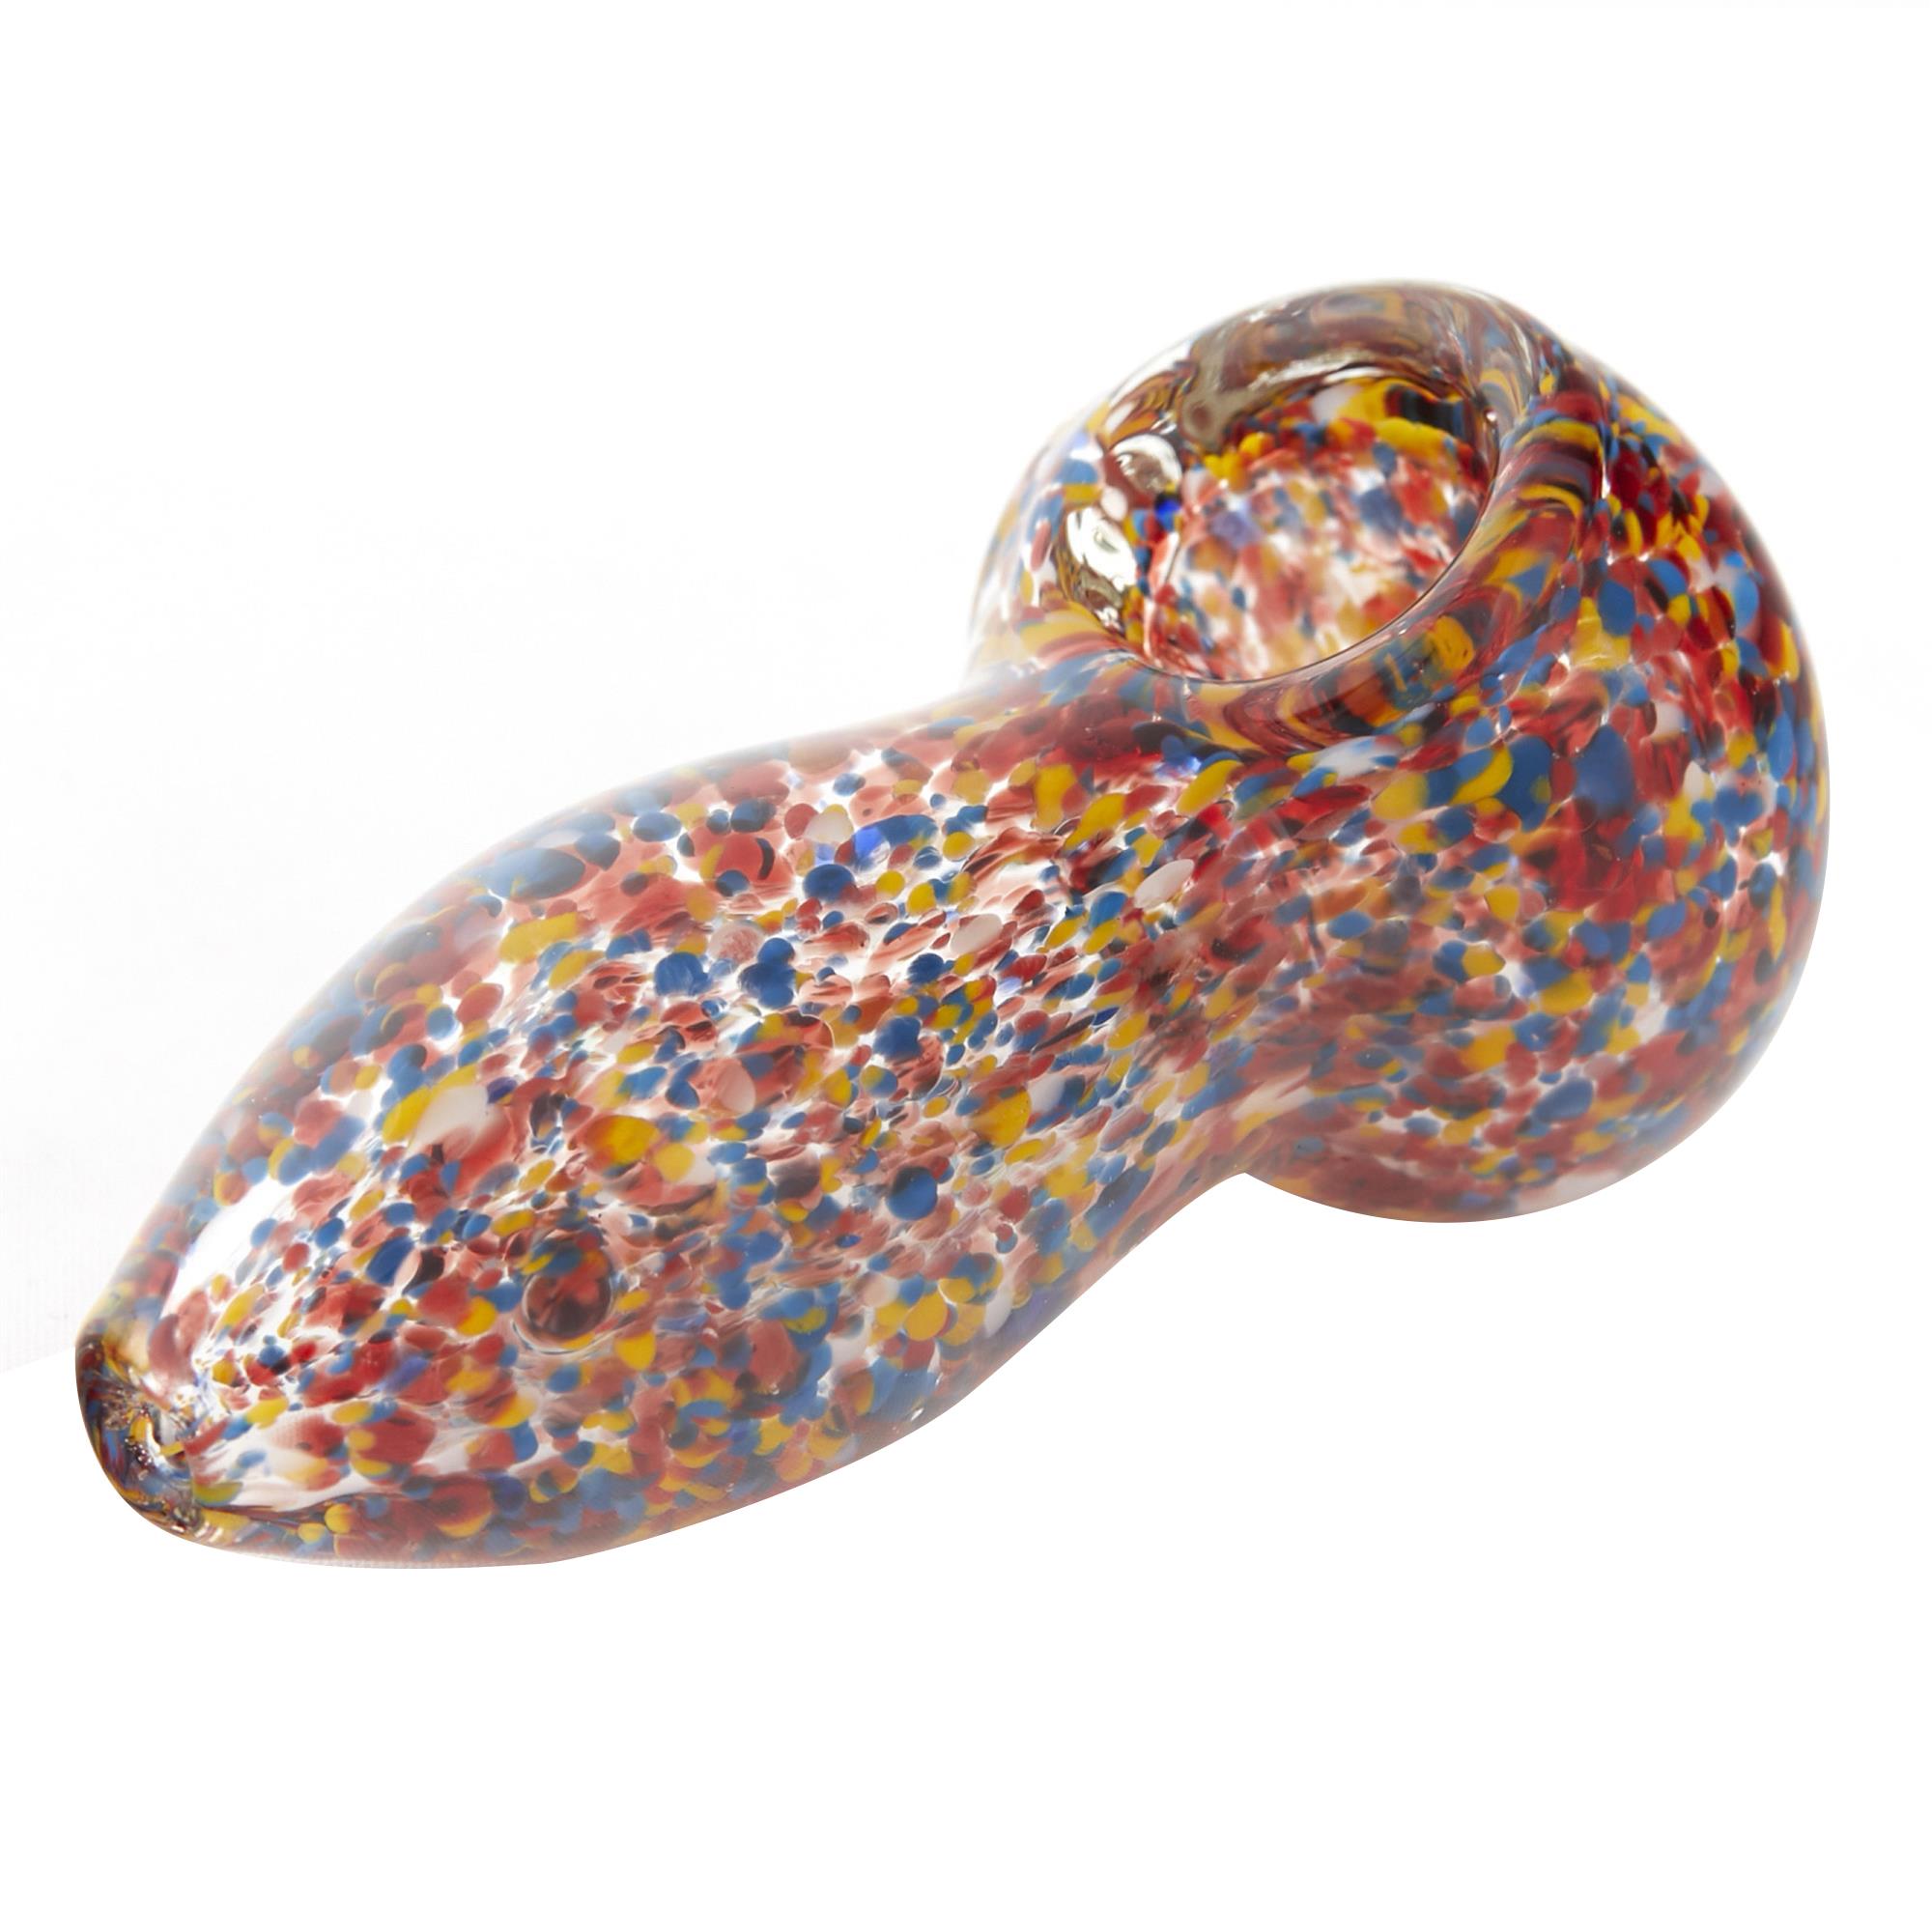 STAY TRIPPY SPOON PIPE